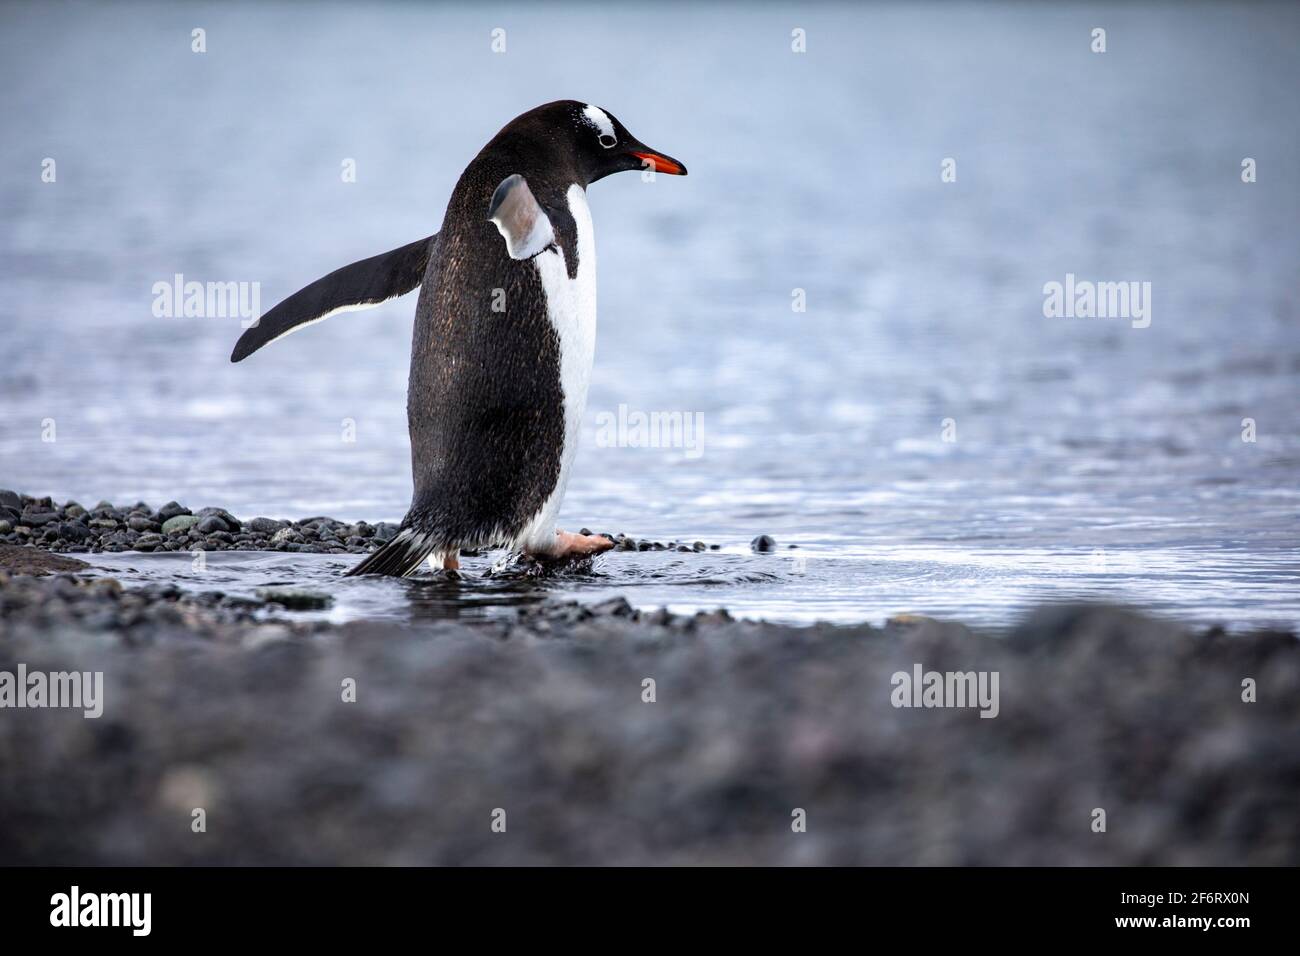 Gentoo penguin waddles in water from cold sea in Antarctica. Stock Photo